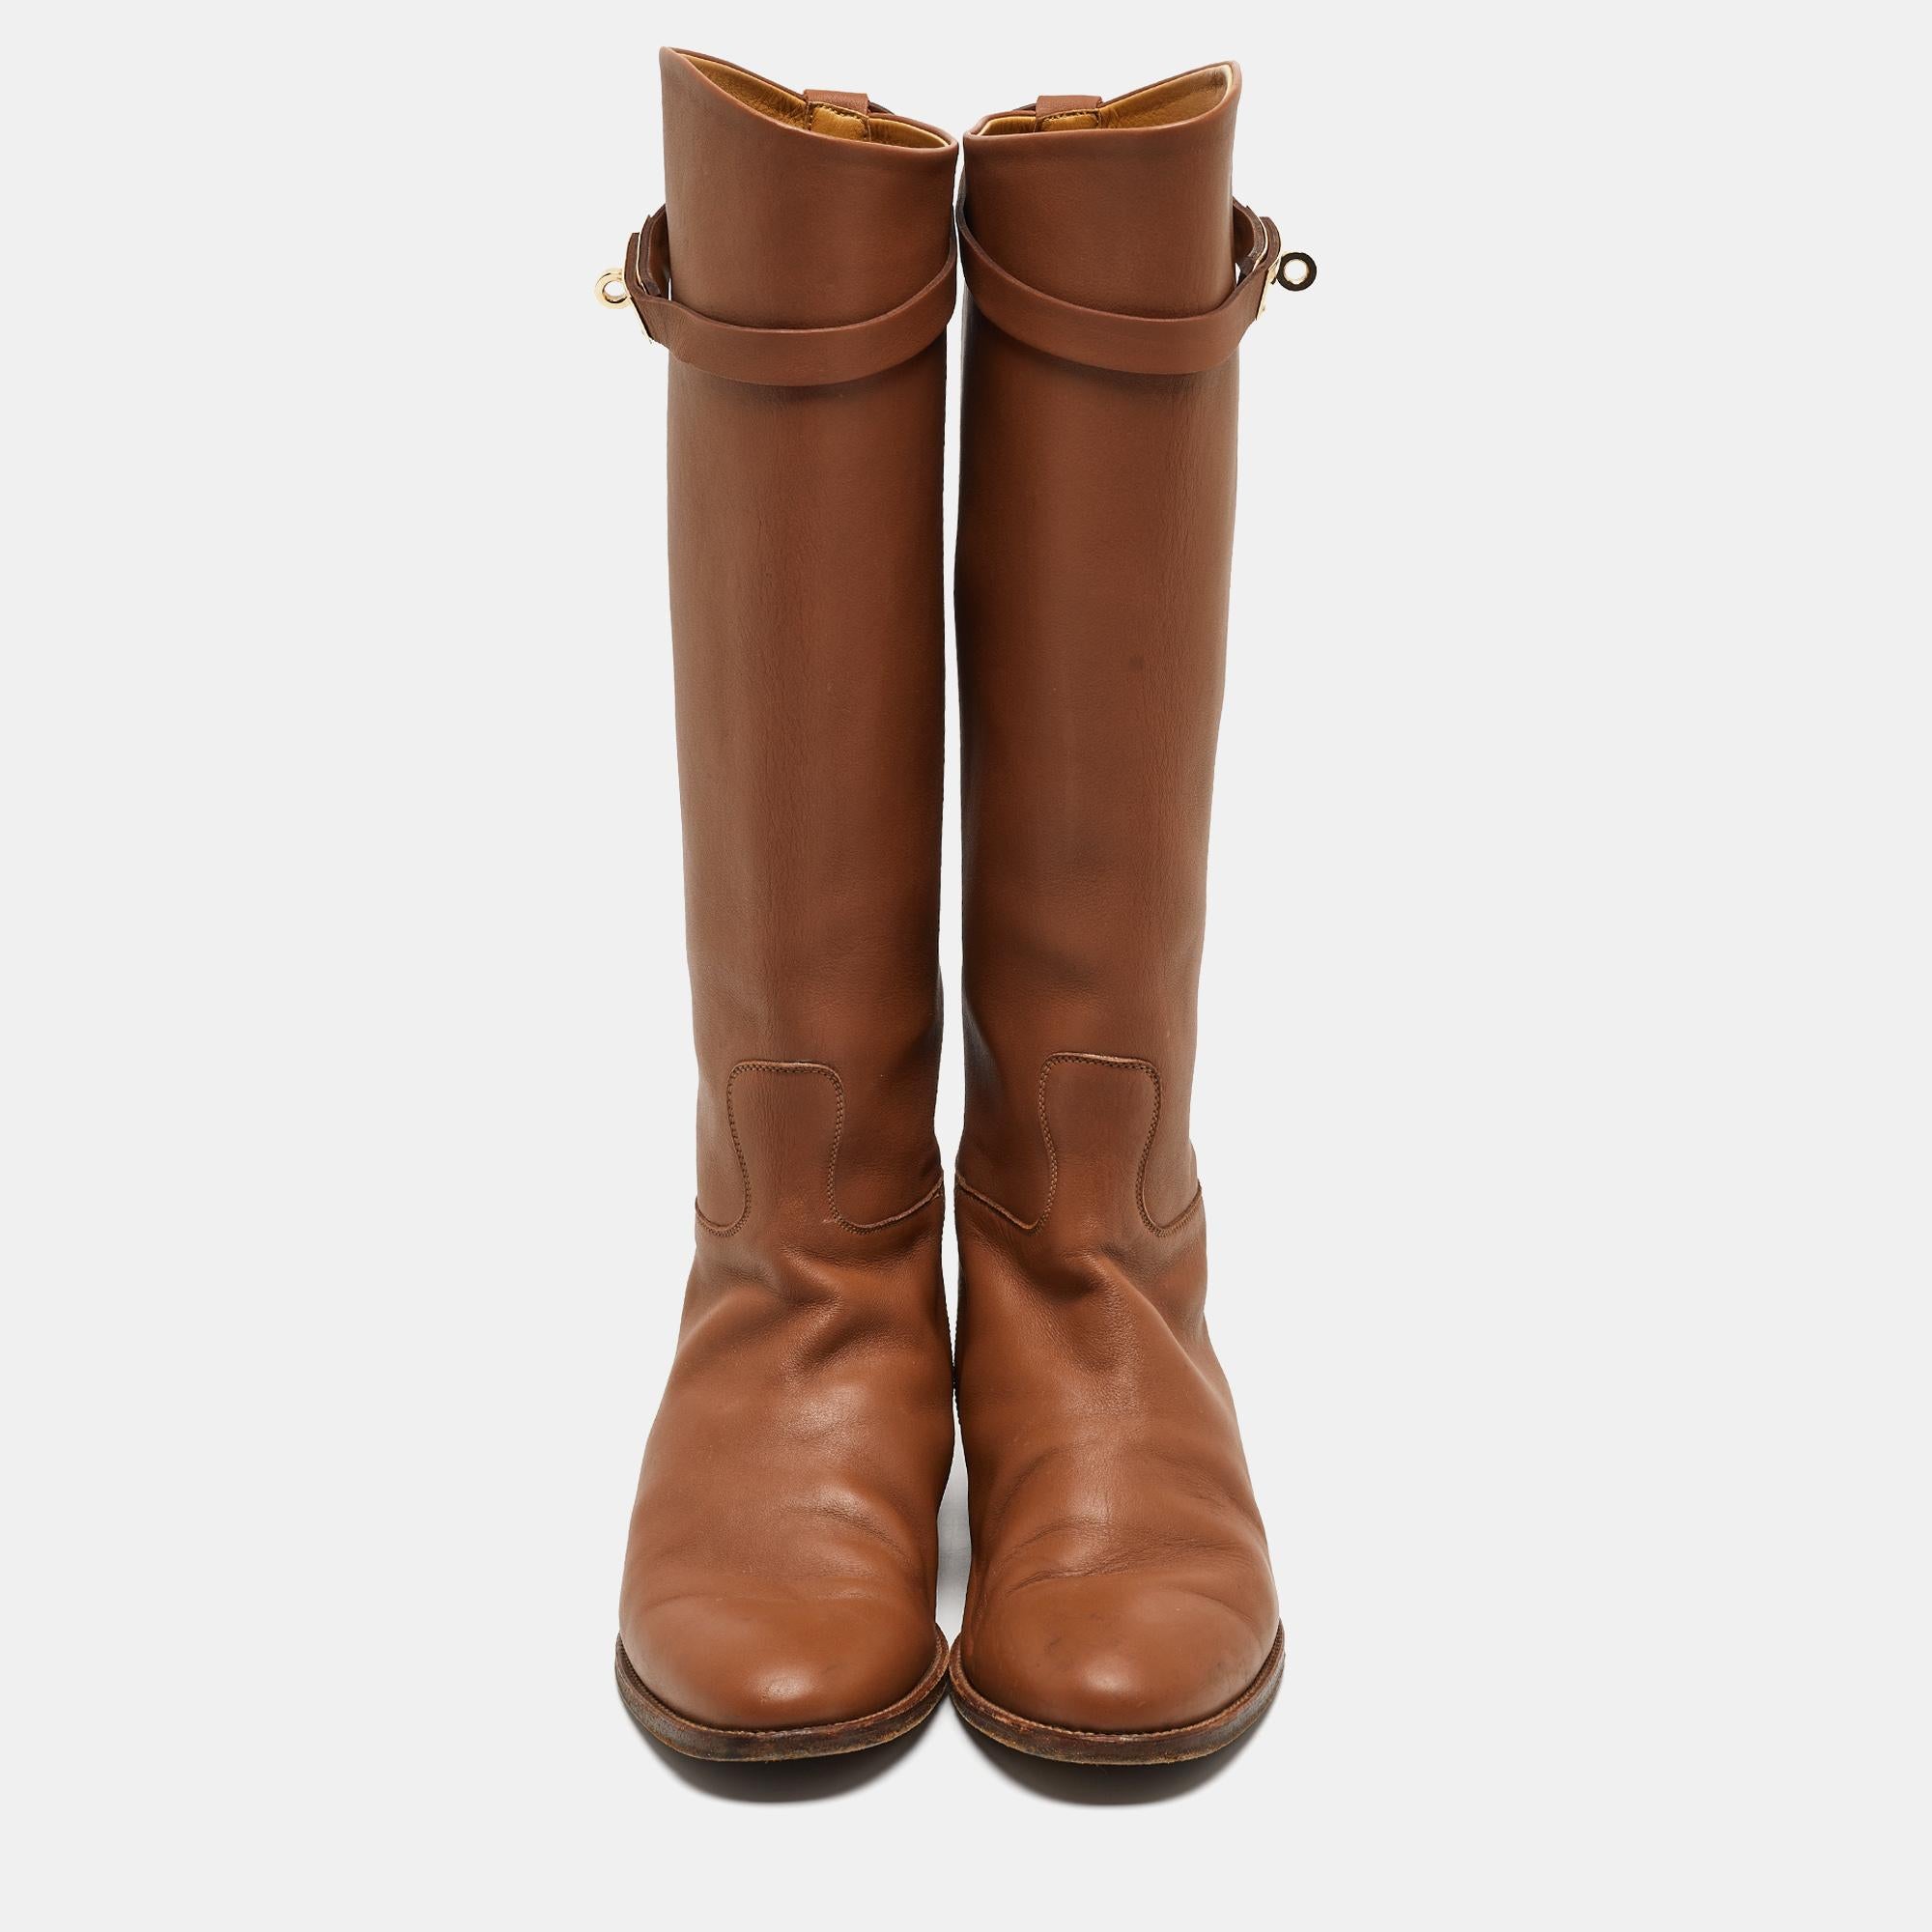 If you're looking to add a pair of knee-length boots to your collection, it should be this one from Hermes! The brown boots are crafted from leather into a chic silhouette and finished with signature lock straps.

